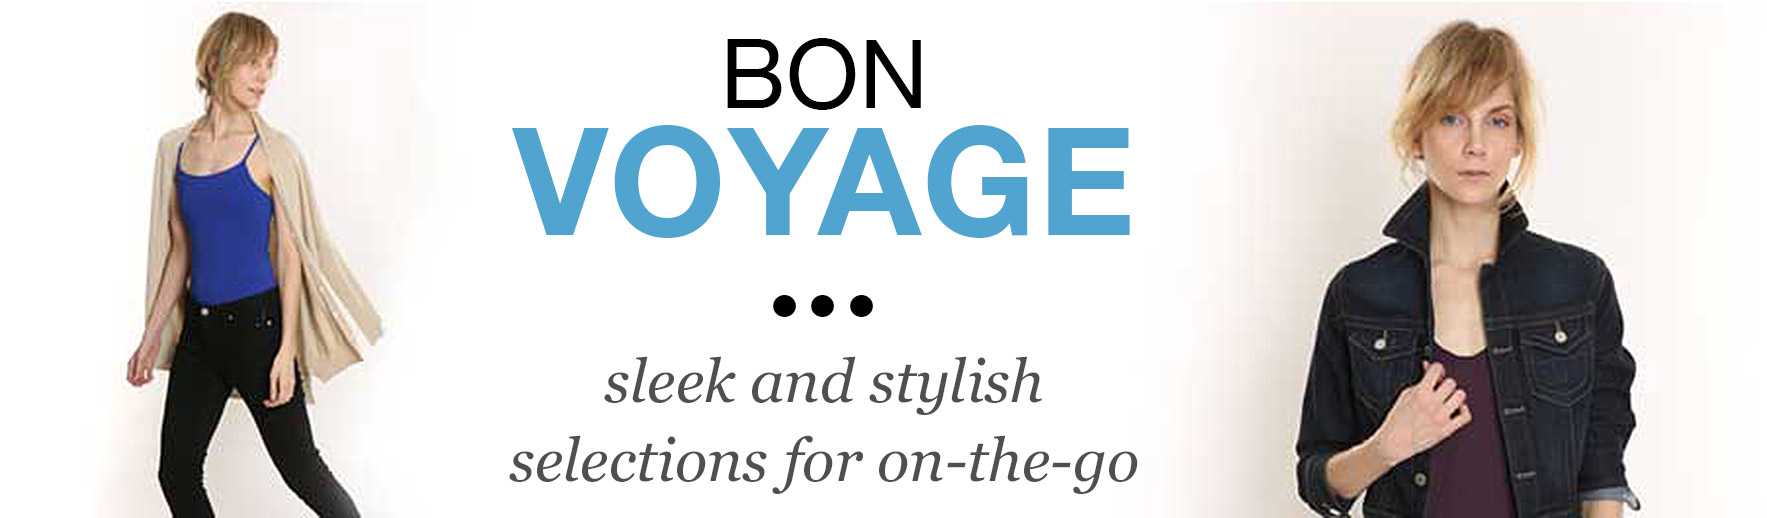 Bon Voyage - sleek and stylish selections for on-the-go